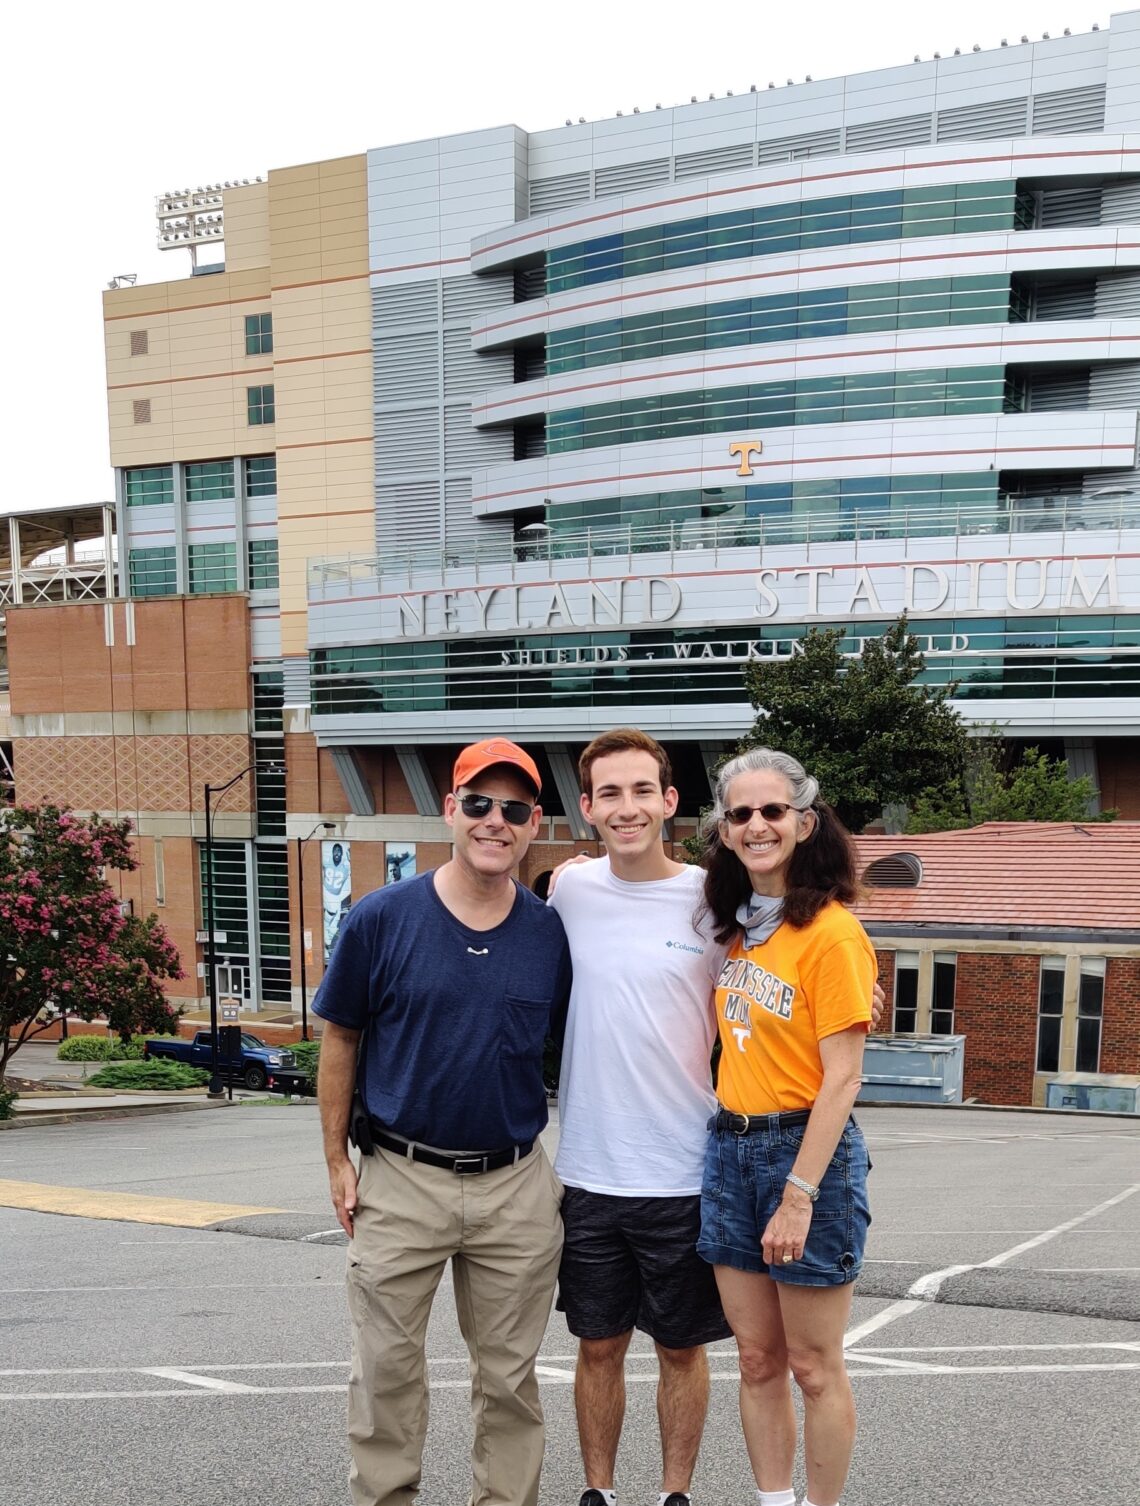 Our last day together in front of Neyland Stadium at the University of Tennessee in Knoxville. We are going to miss him, but I think he will have a great year!